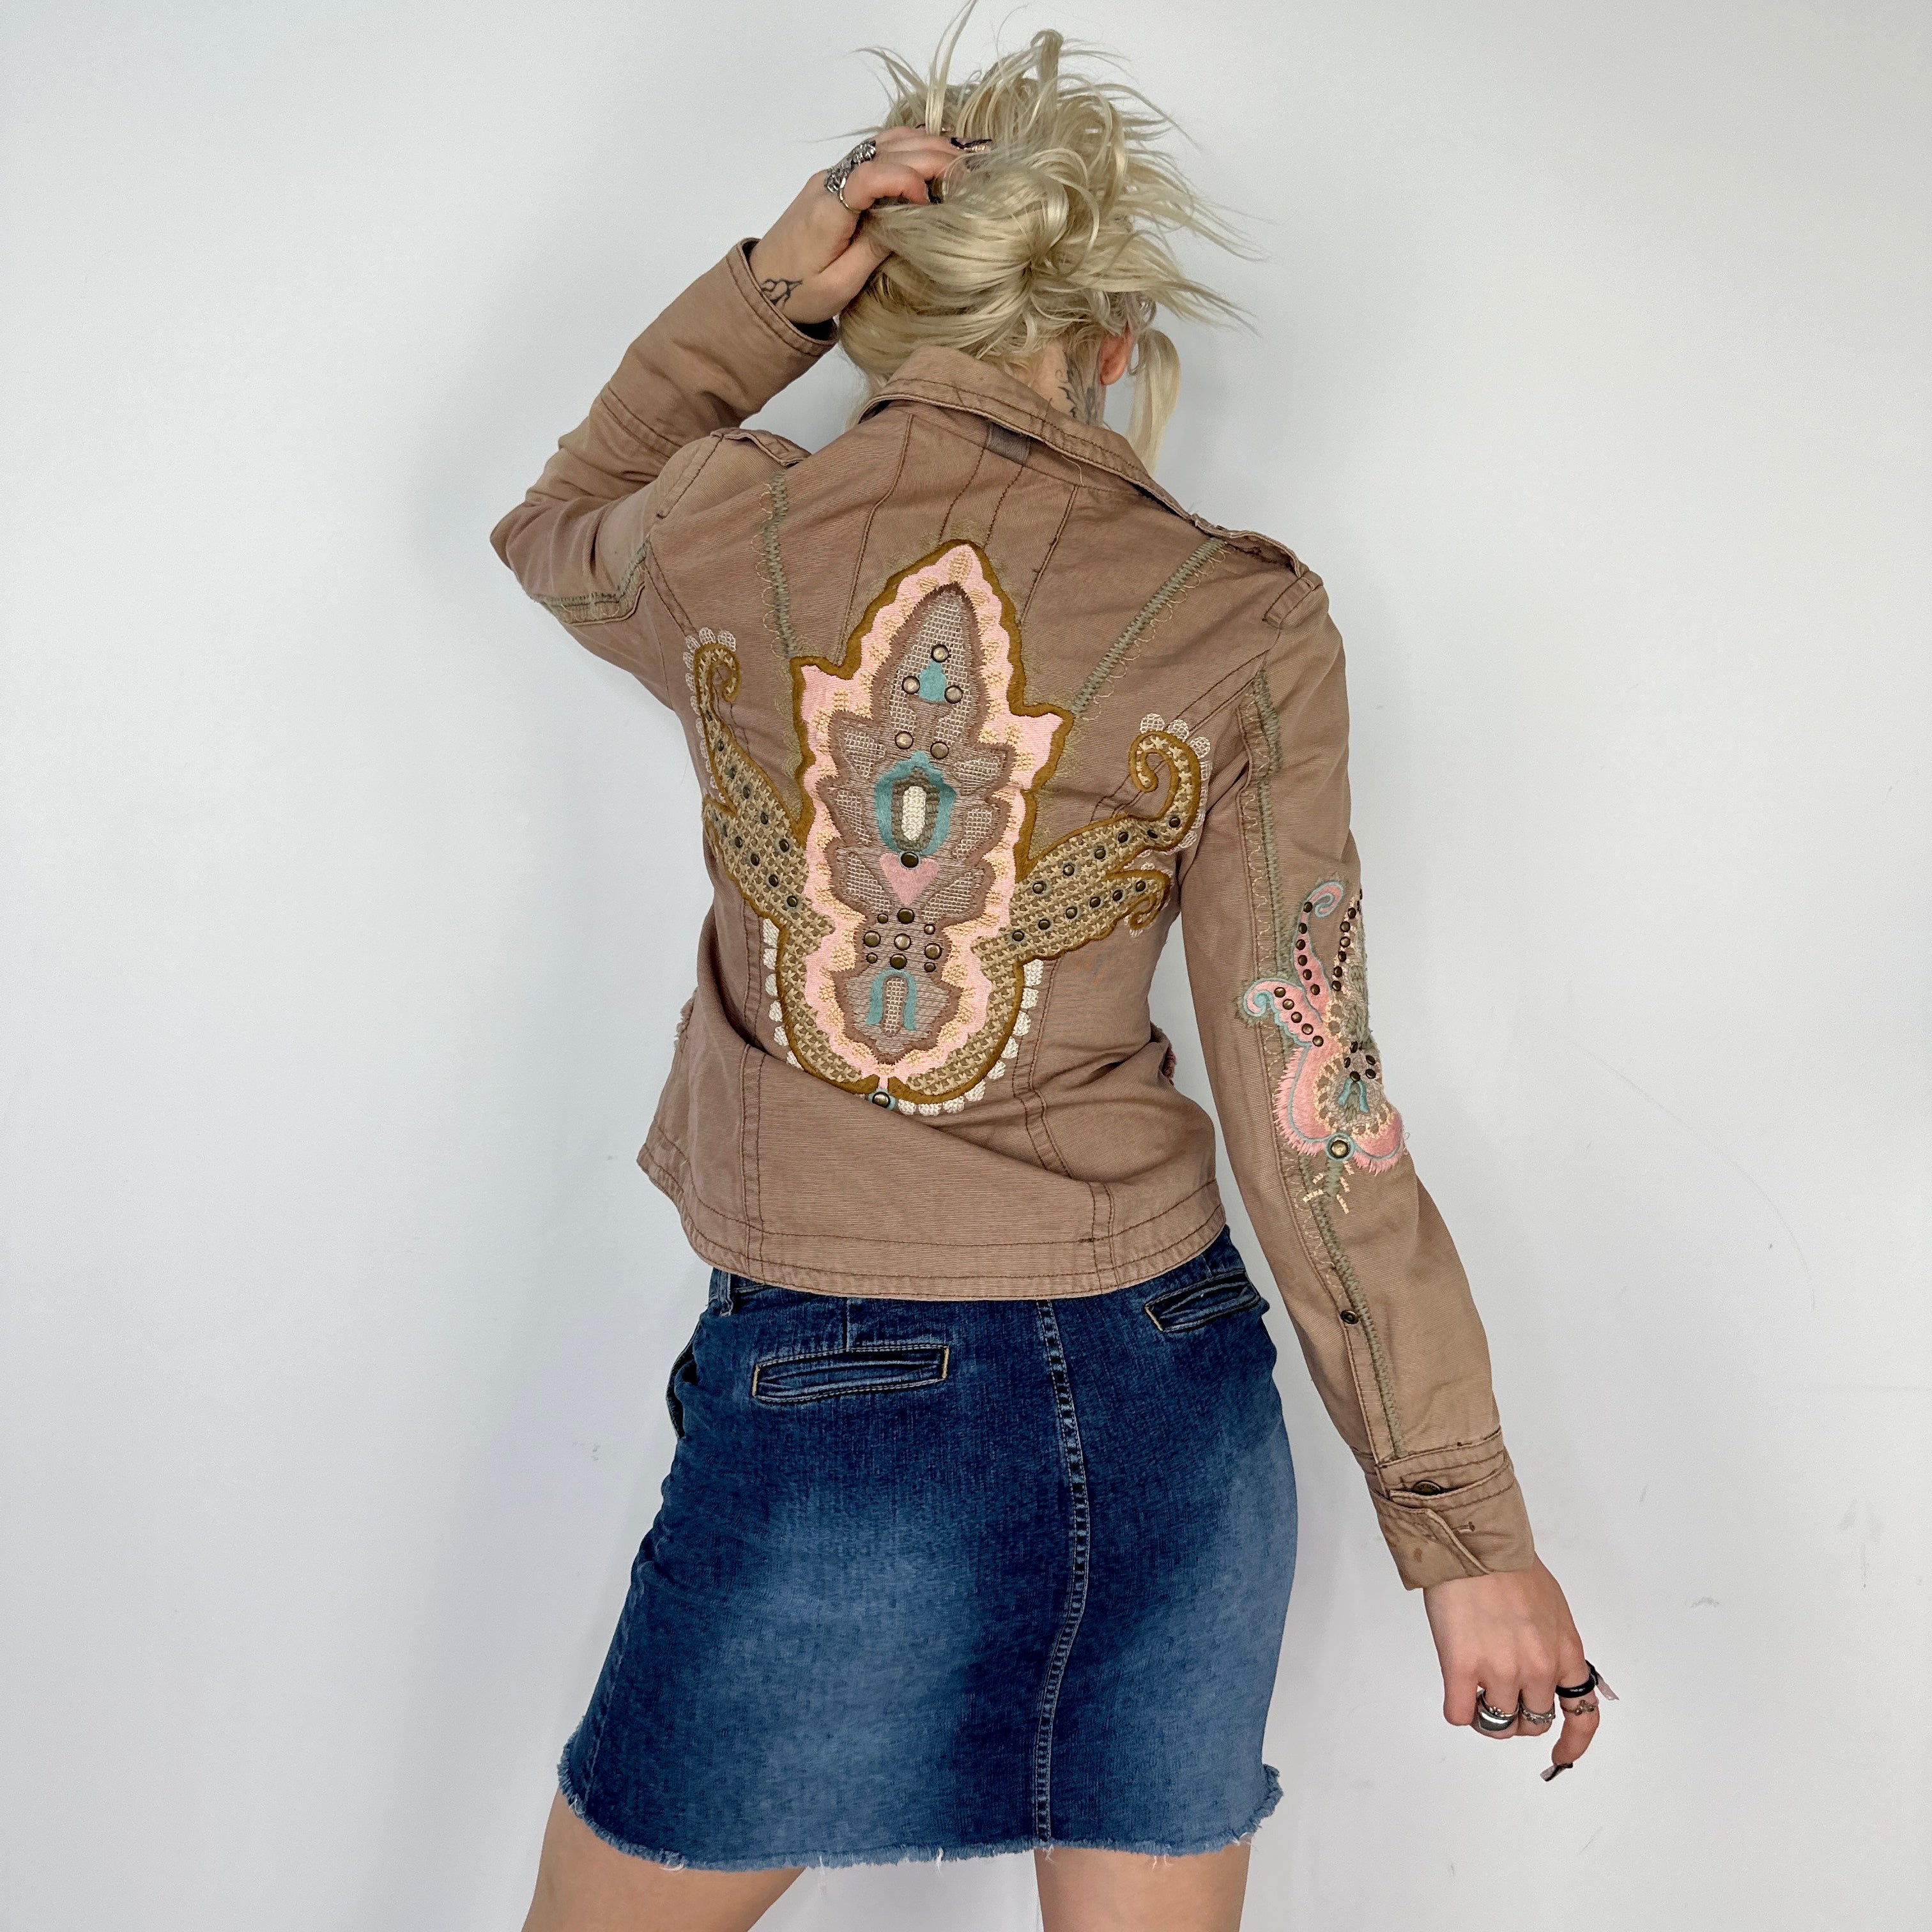 Embroidered Canvas Light Jacket (S/M)